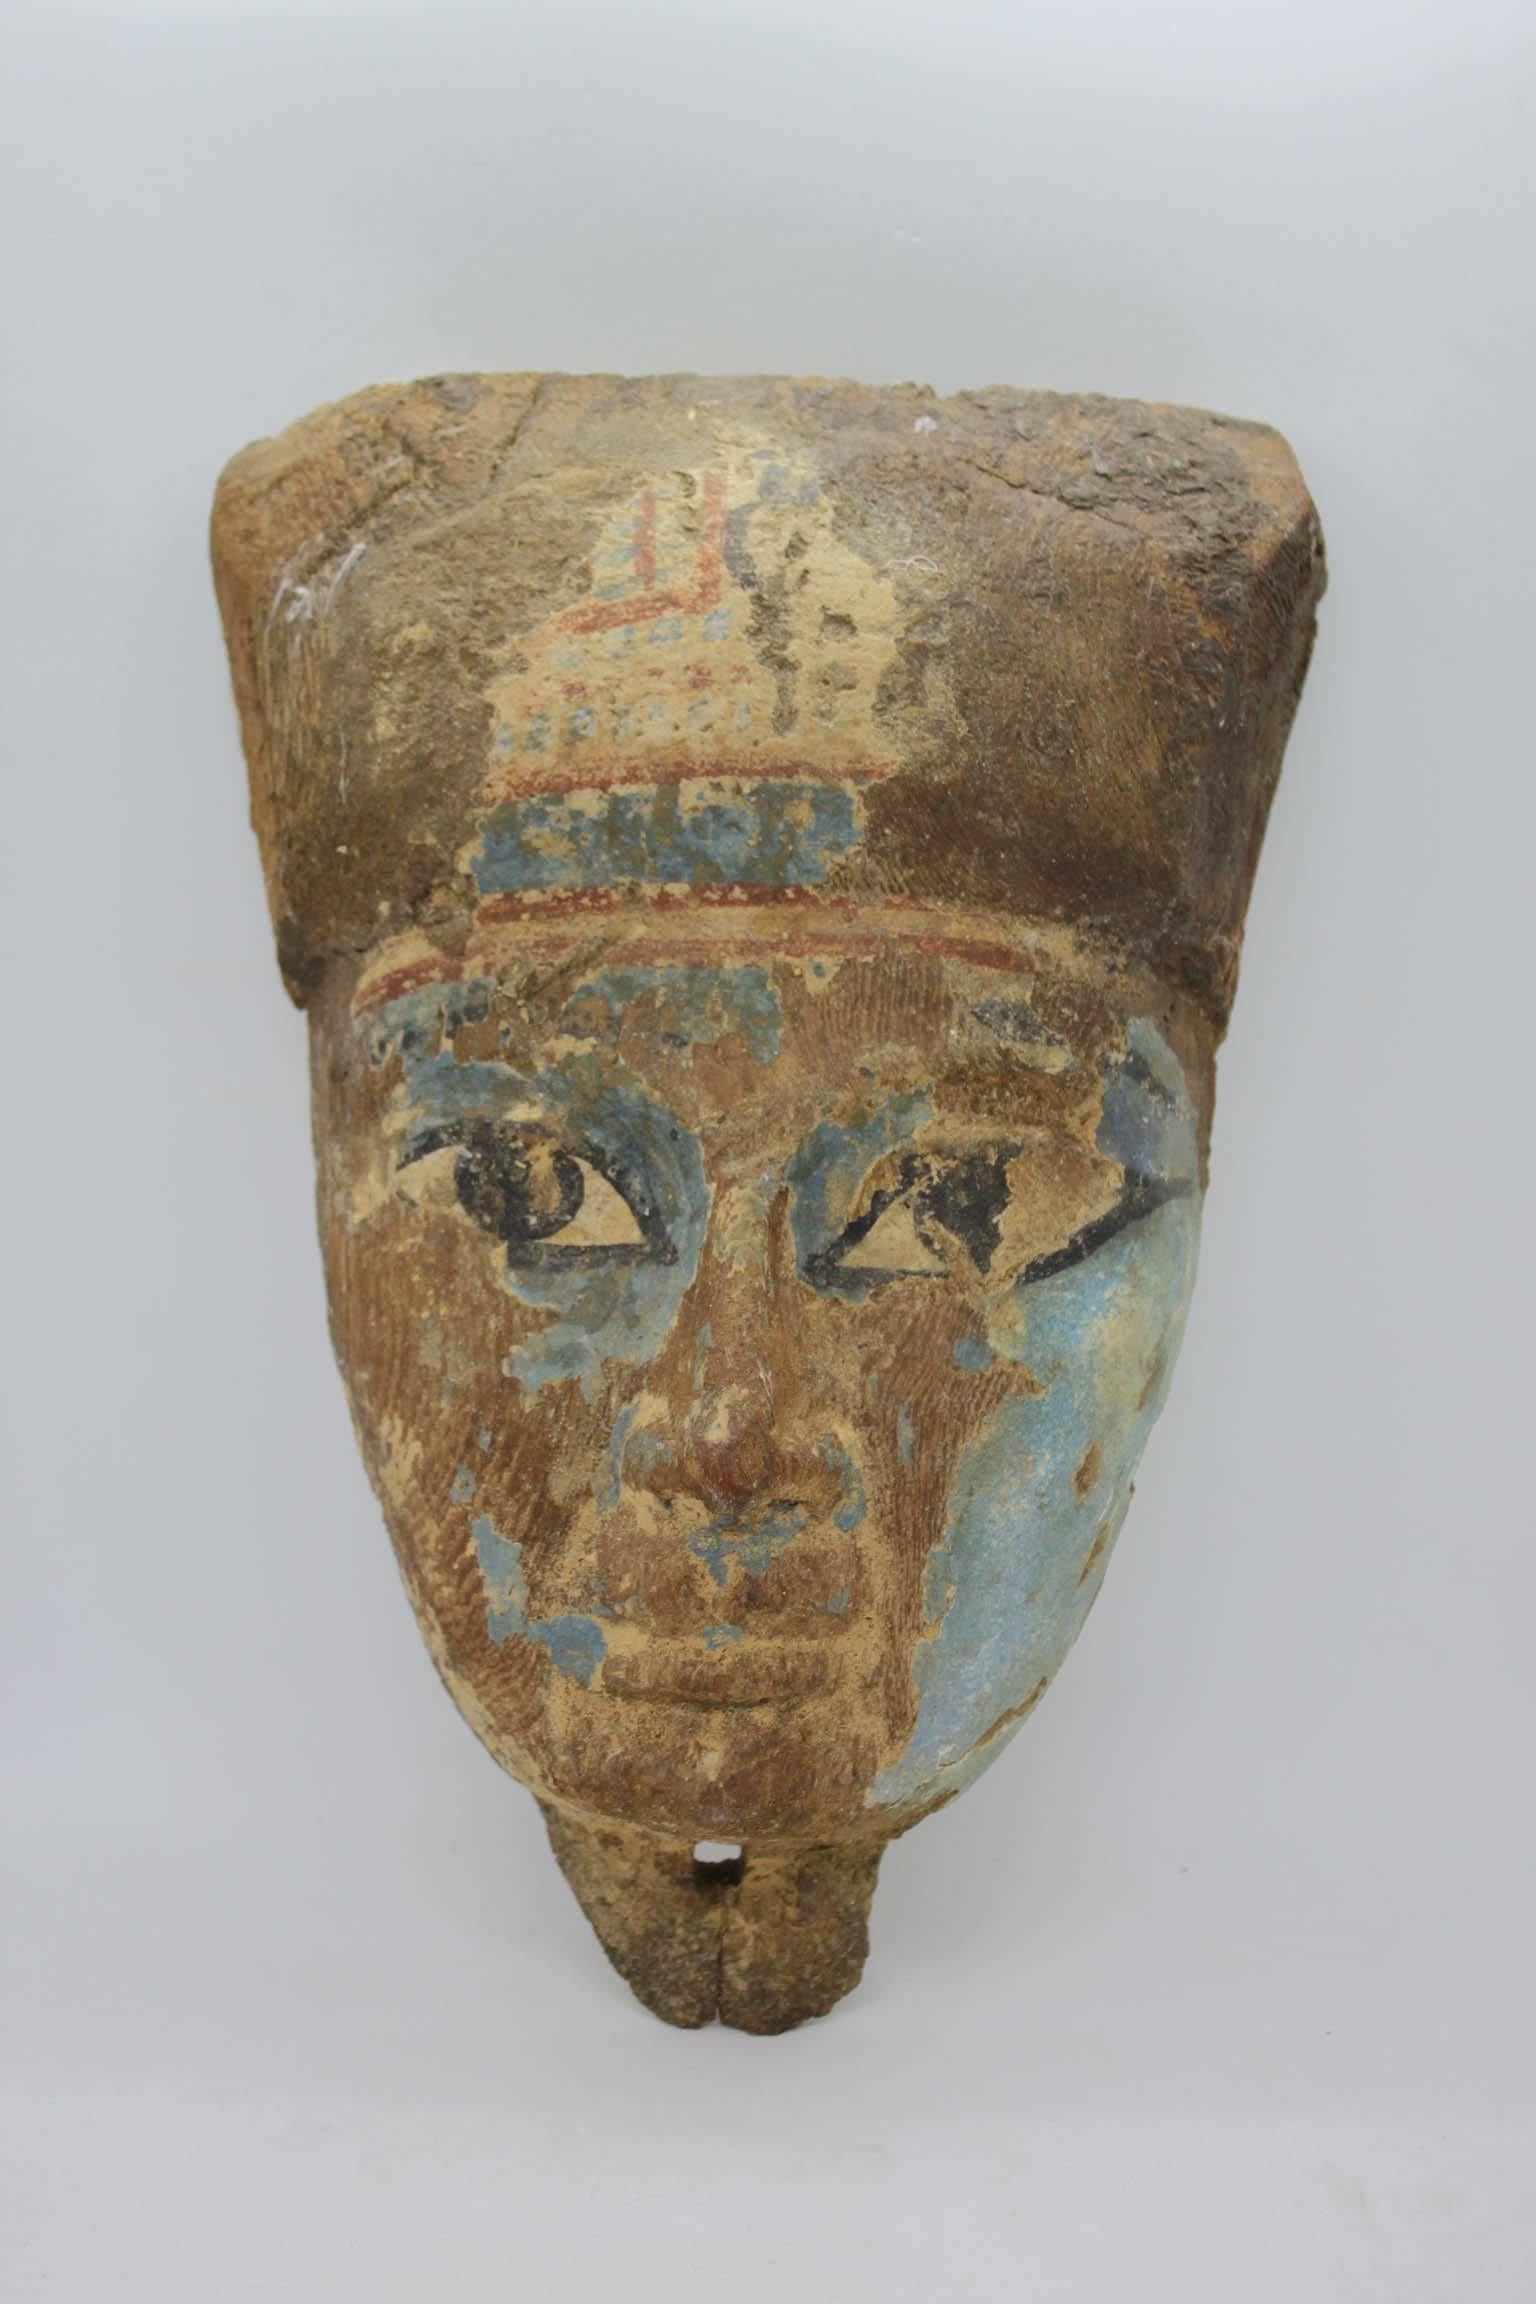 Authentic Egyptian Sarcophagus mask with painted decoration, Ptolemaic period (323 - 30 BC.)
Good condition. 
 Dimensions: Height 30cm, width 21cm, depth 5cm.